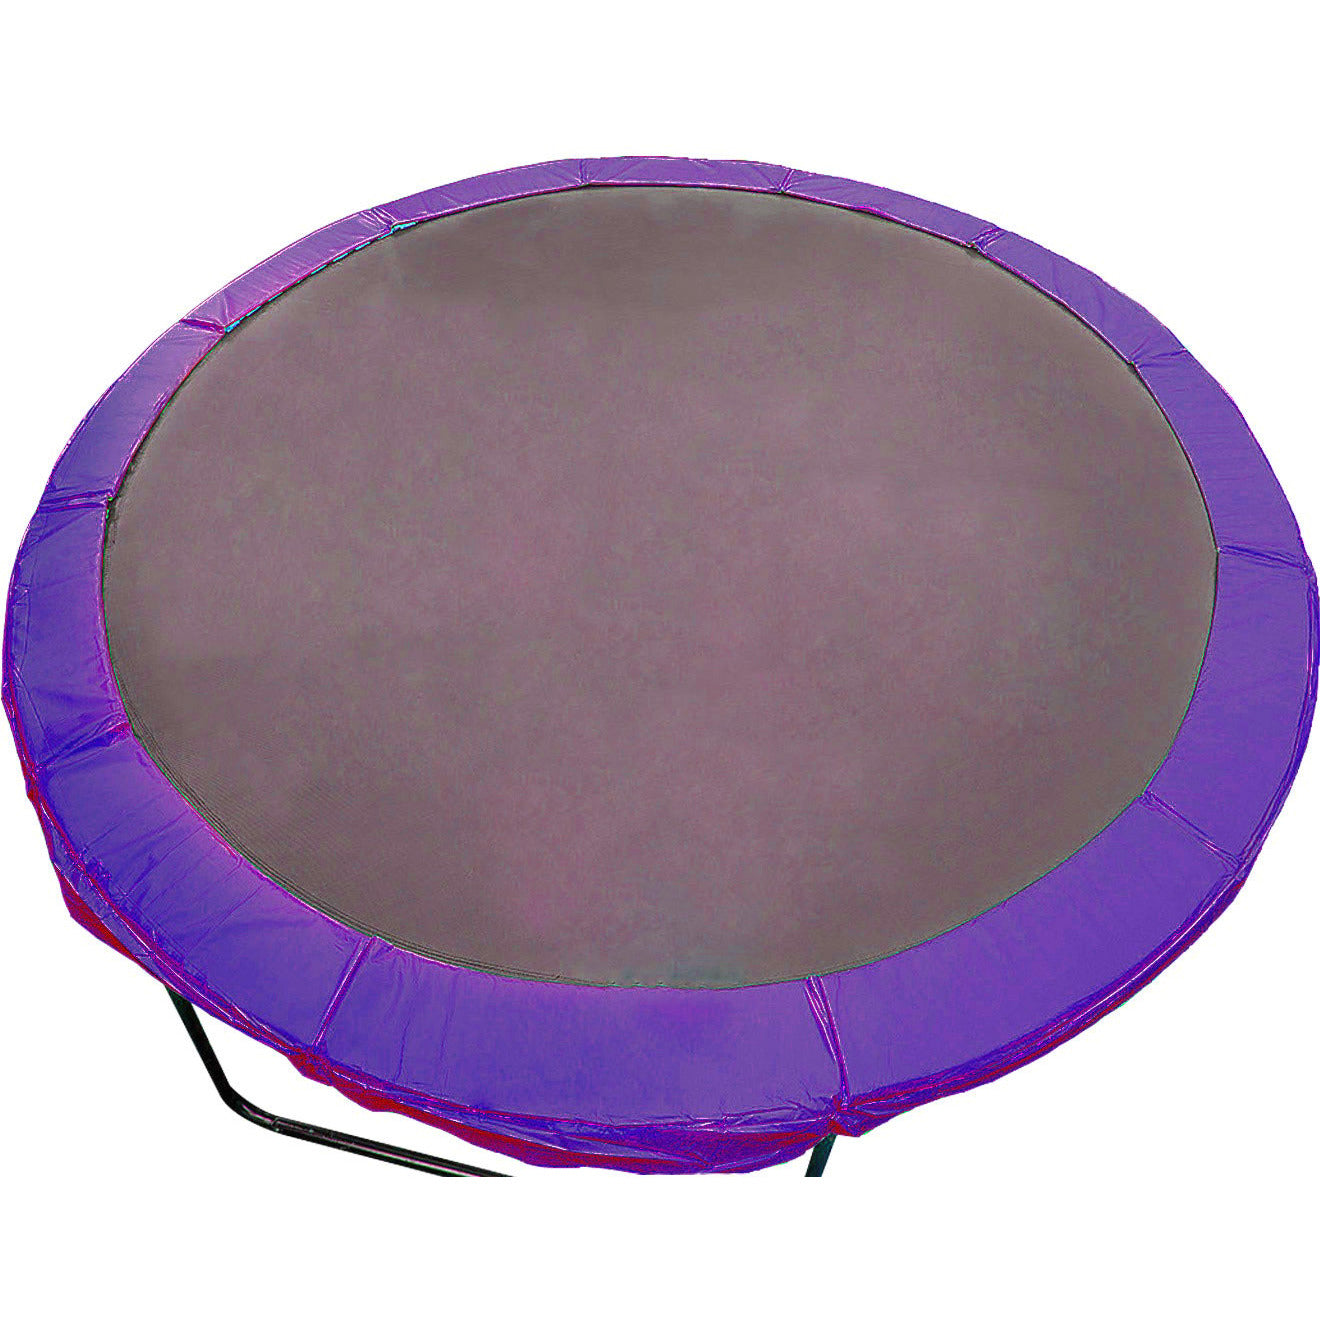 8ft Kahuna Trampoline Replacement Pad Spring Cover